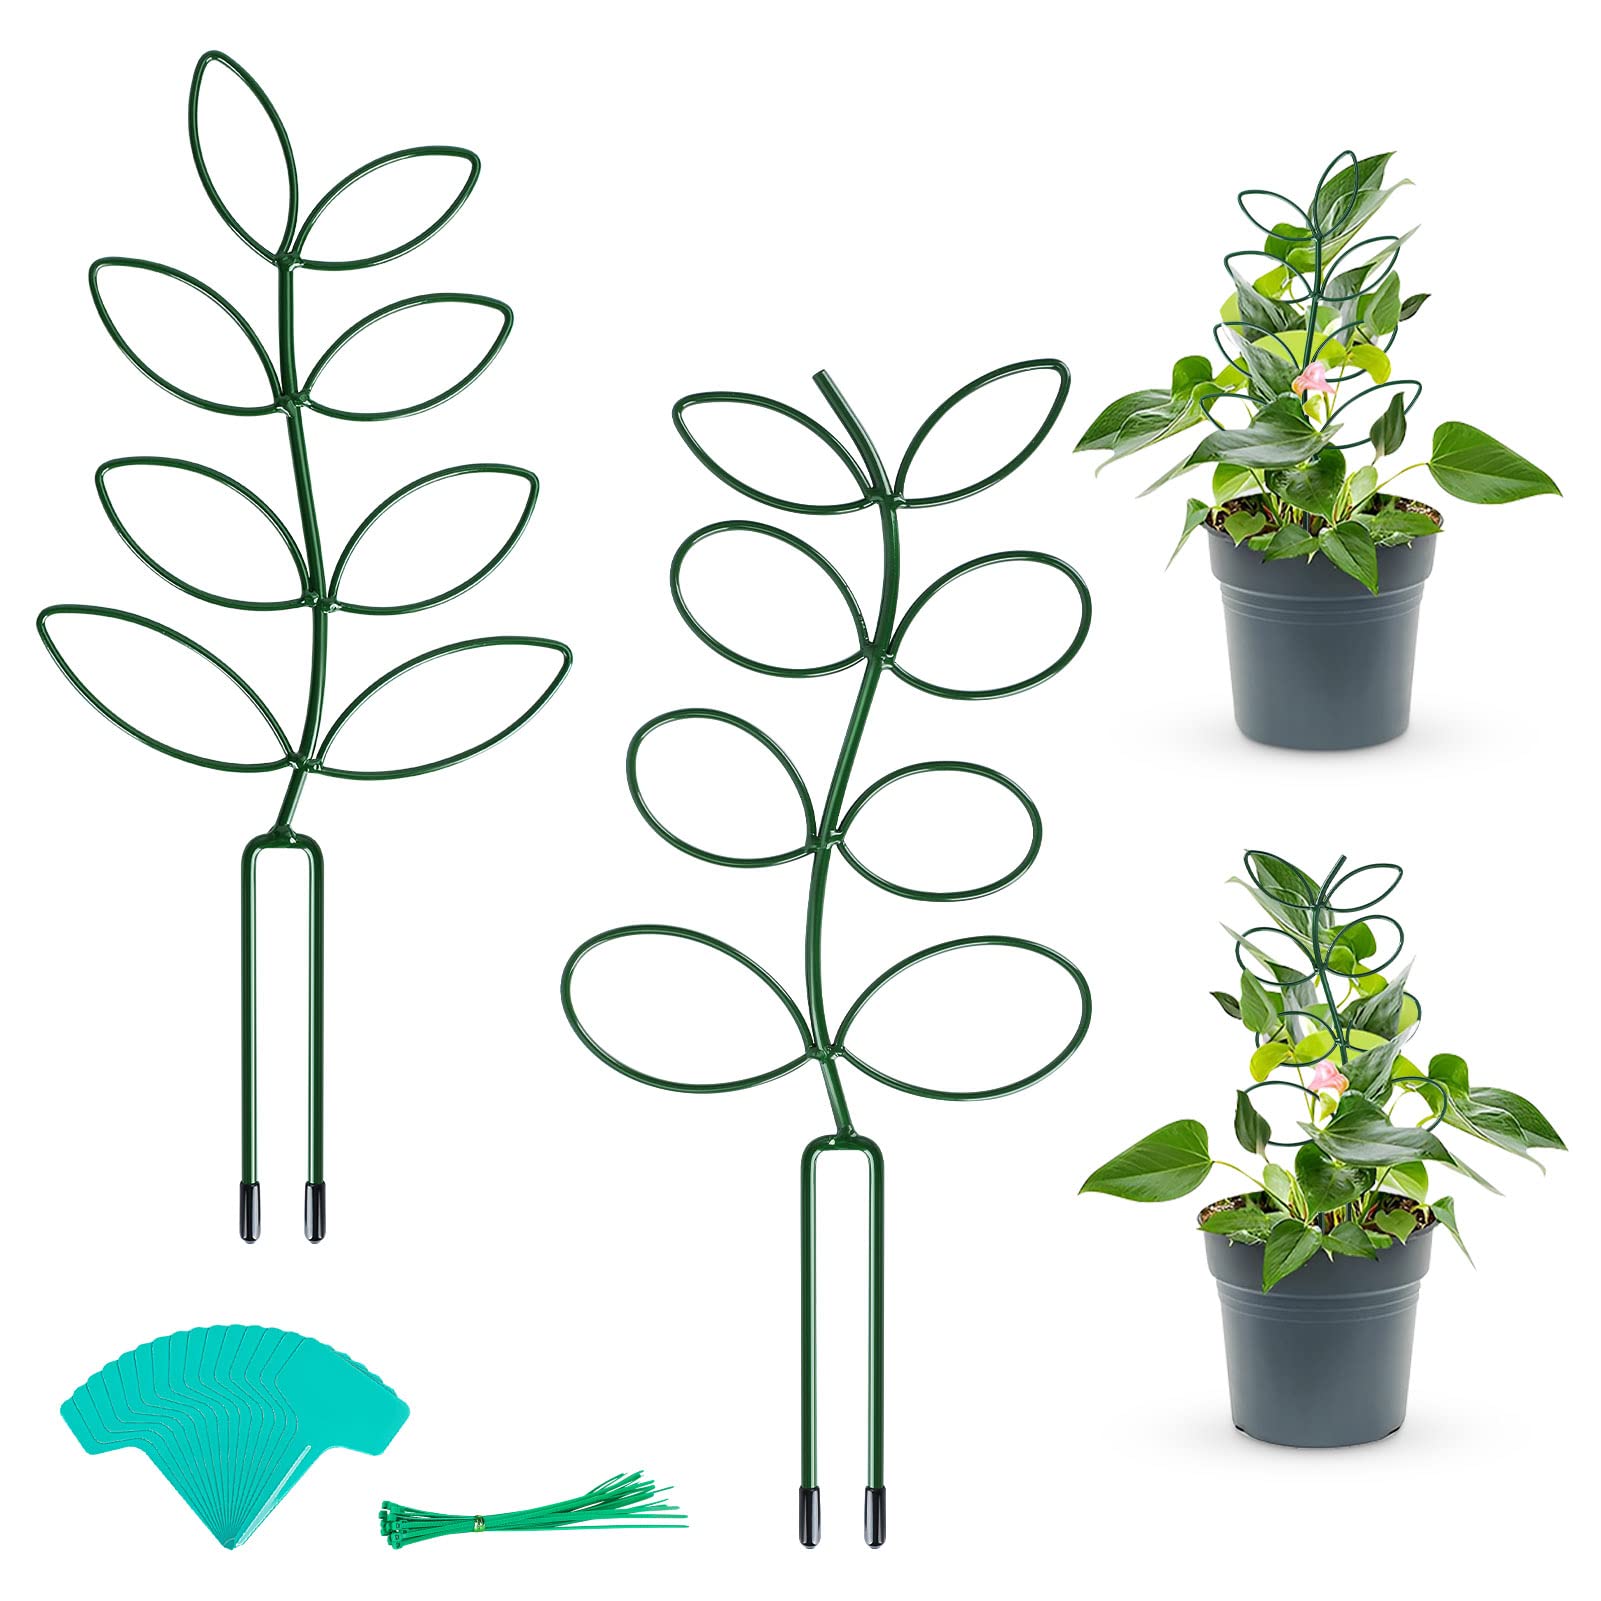 GROWNEER 2 Pcs 14" Small Plant Trellis for Climbing Plant, Leaf Shaped Metal Potted Trellis with 20 Pcs Cable Ties, 15 Pcs Plant Labels, Plant Support for Flower Stem Vines, Green